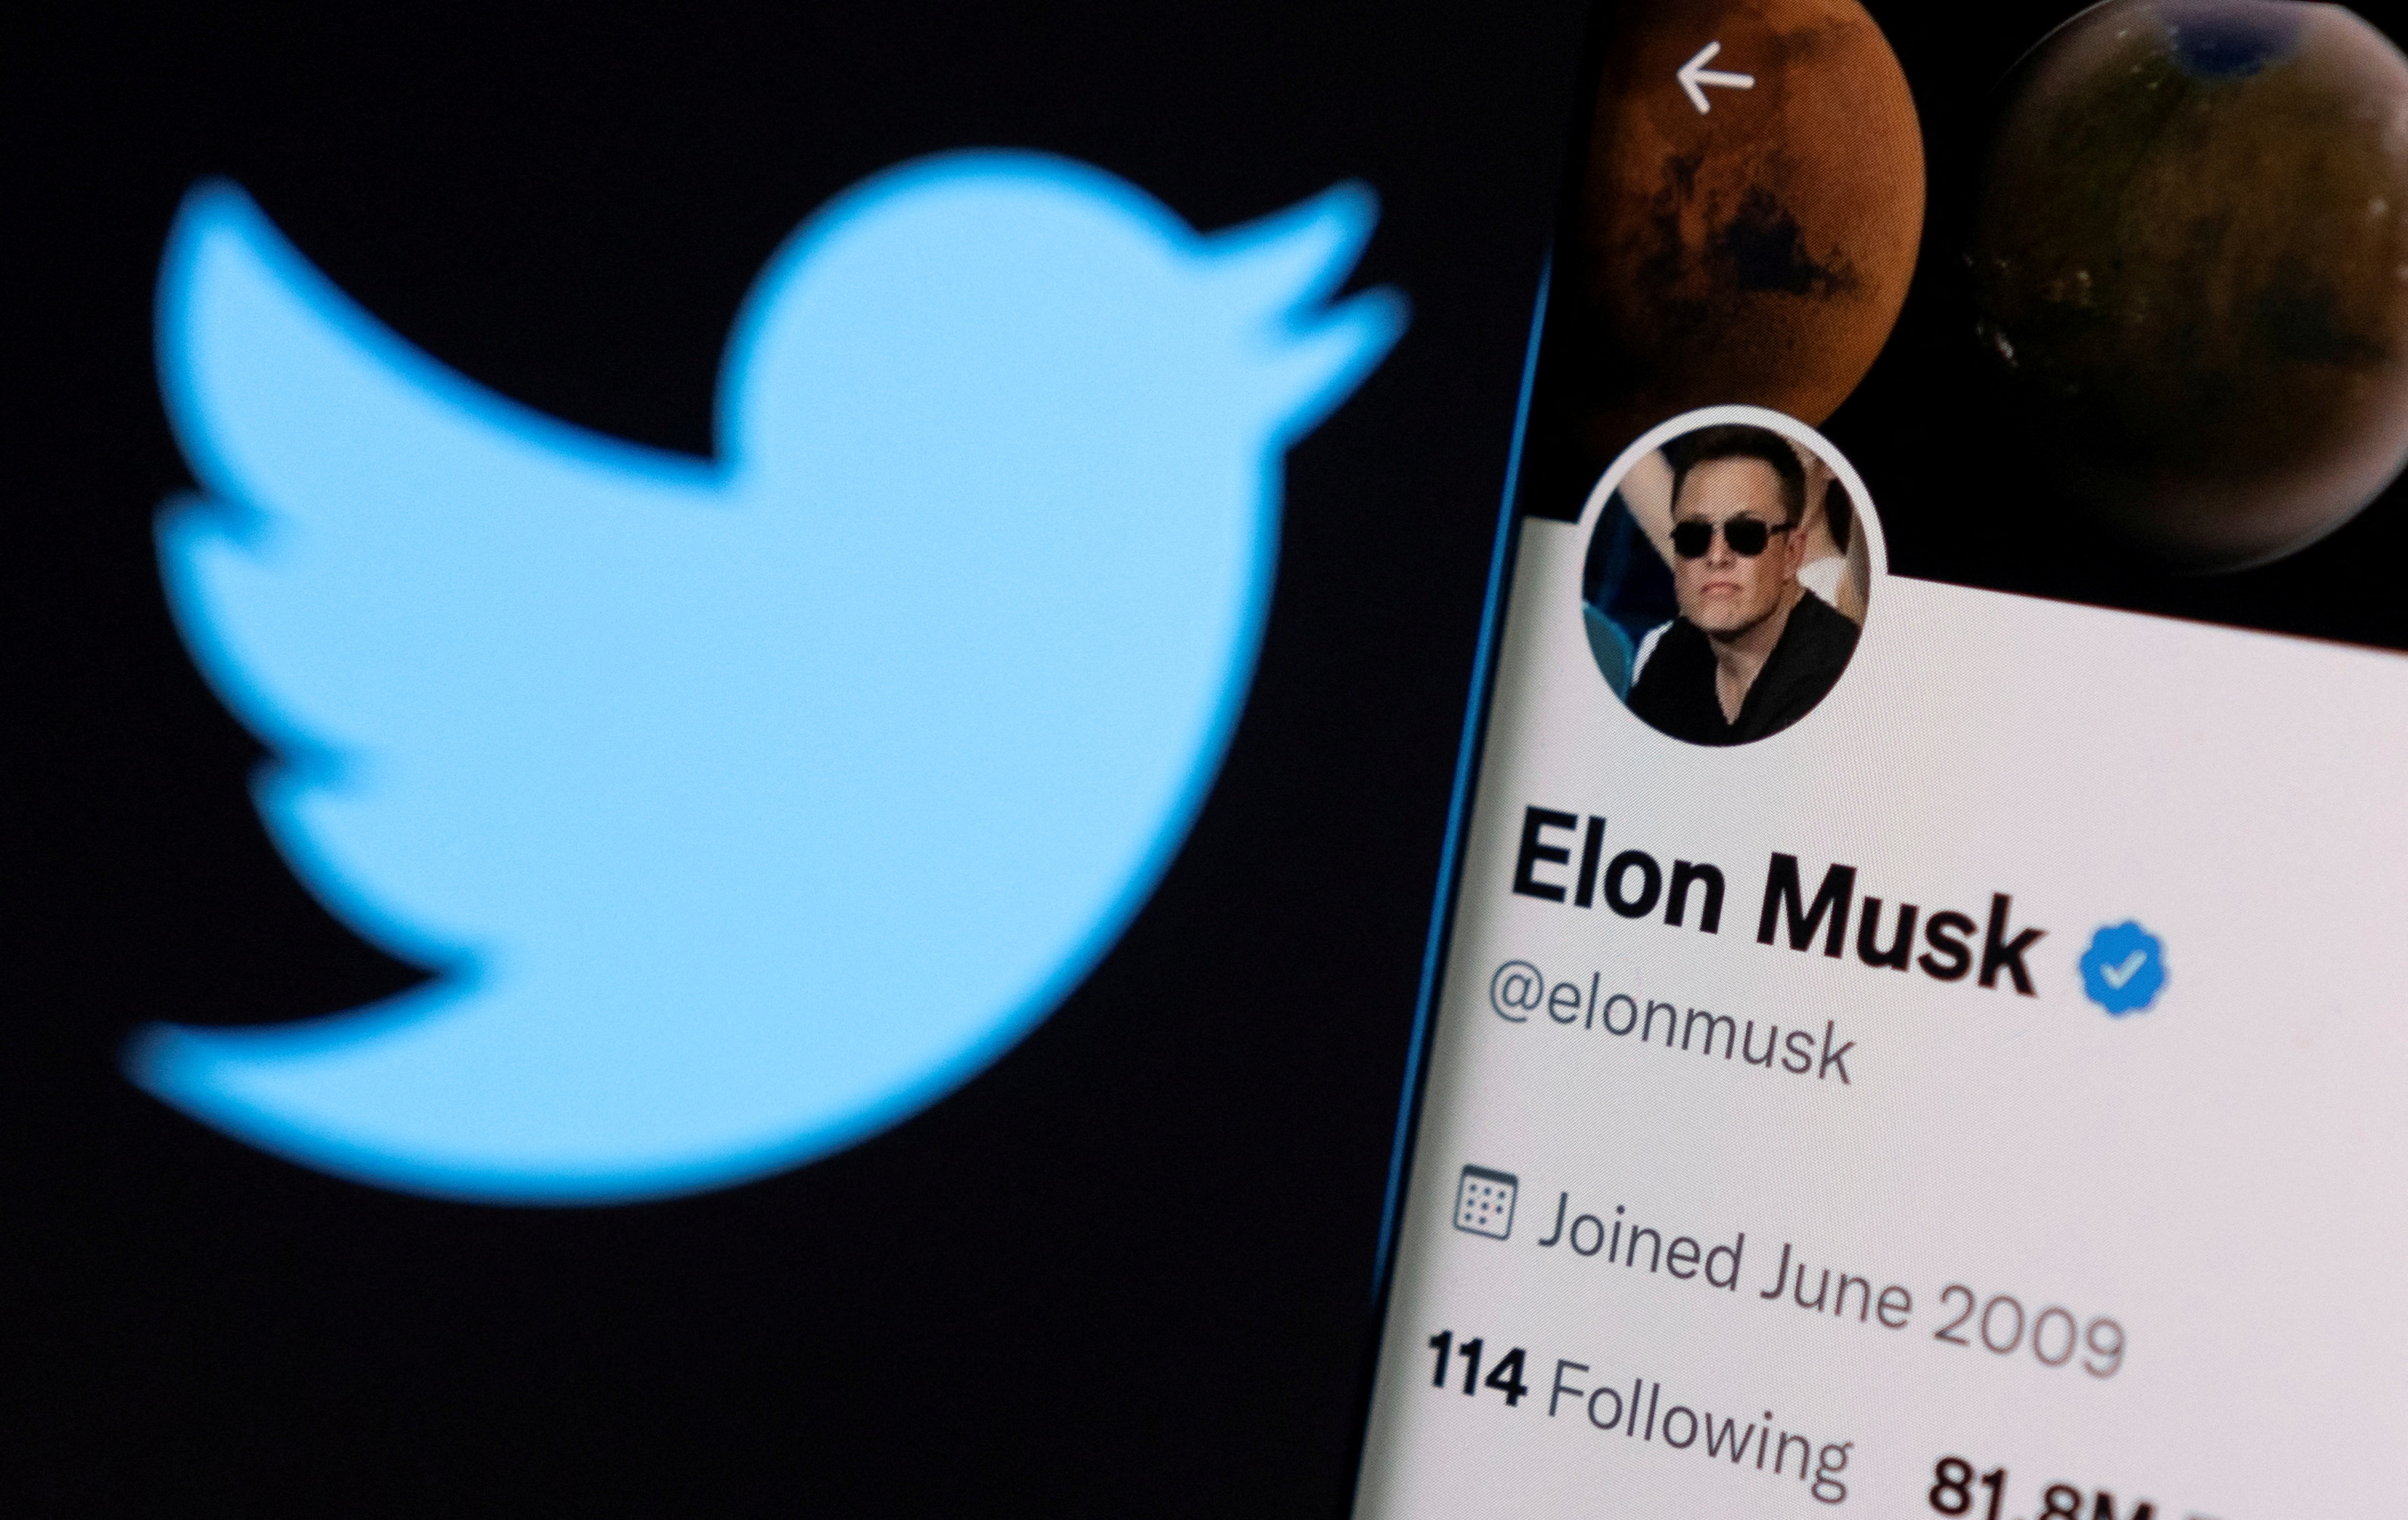 A photo illustration shows Elon Musk's twitter account and the Twitter logo